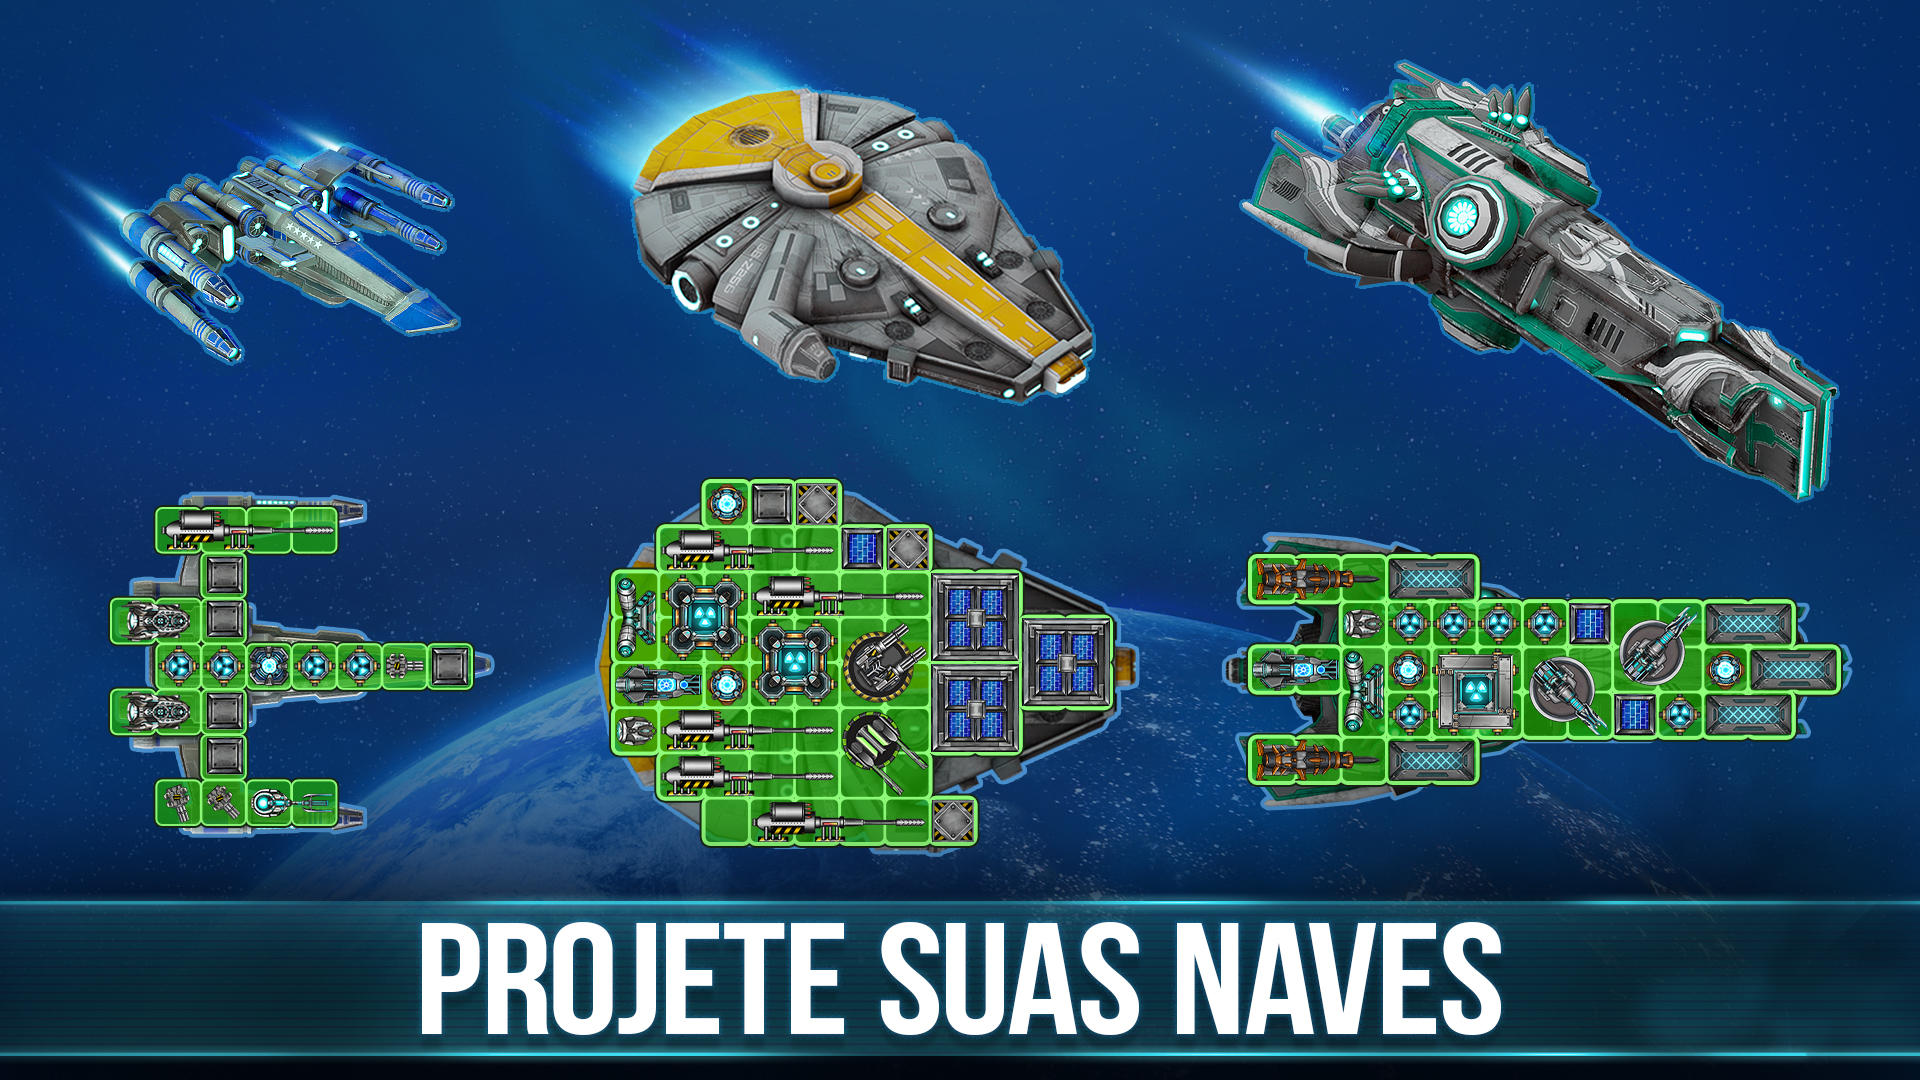 Screenshot 1 of Space Arena－Projete Suas Naves 3.9.2